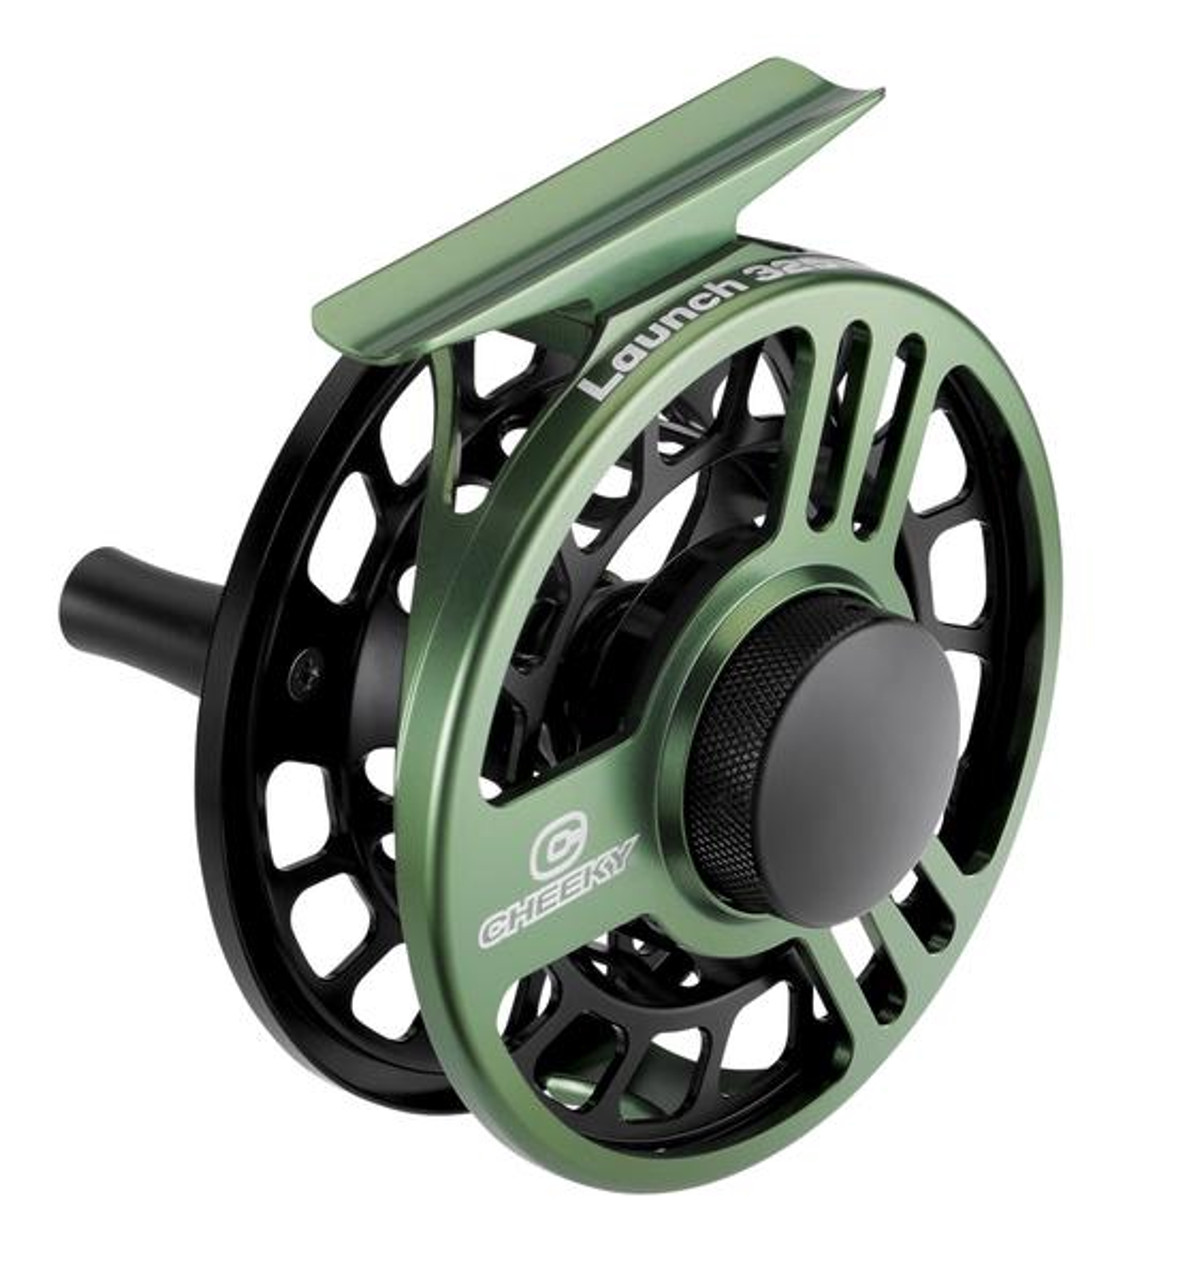 Cheeky Launch 325 Fly Reel, Green/Black - The Mountaineer